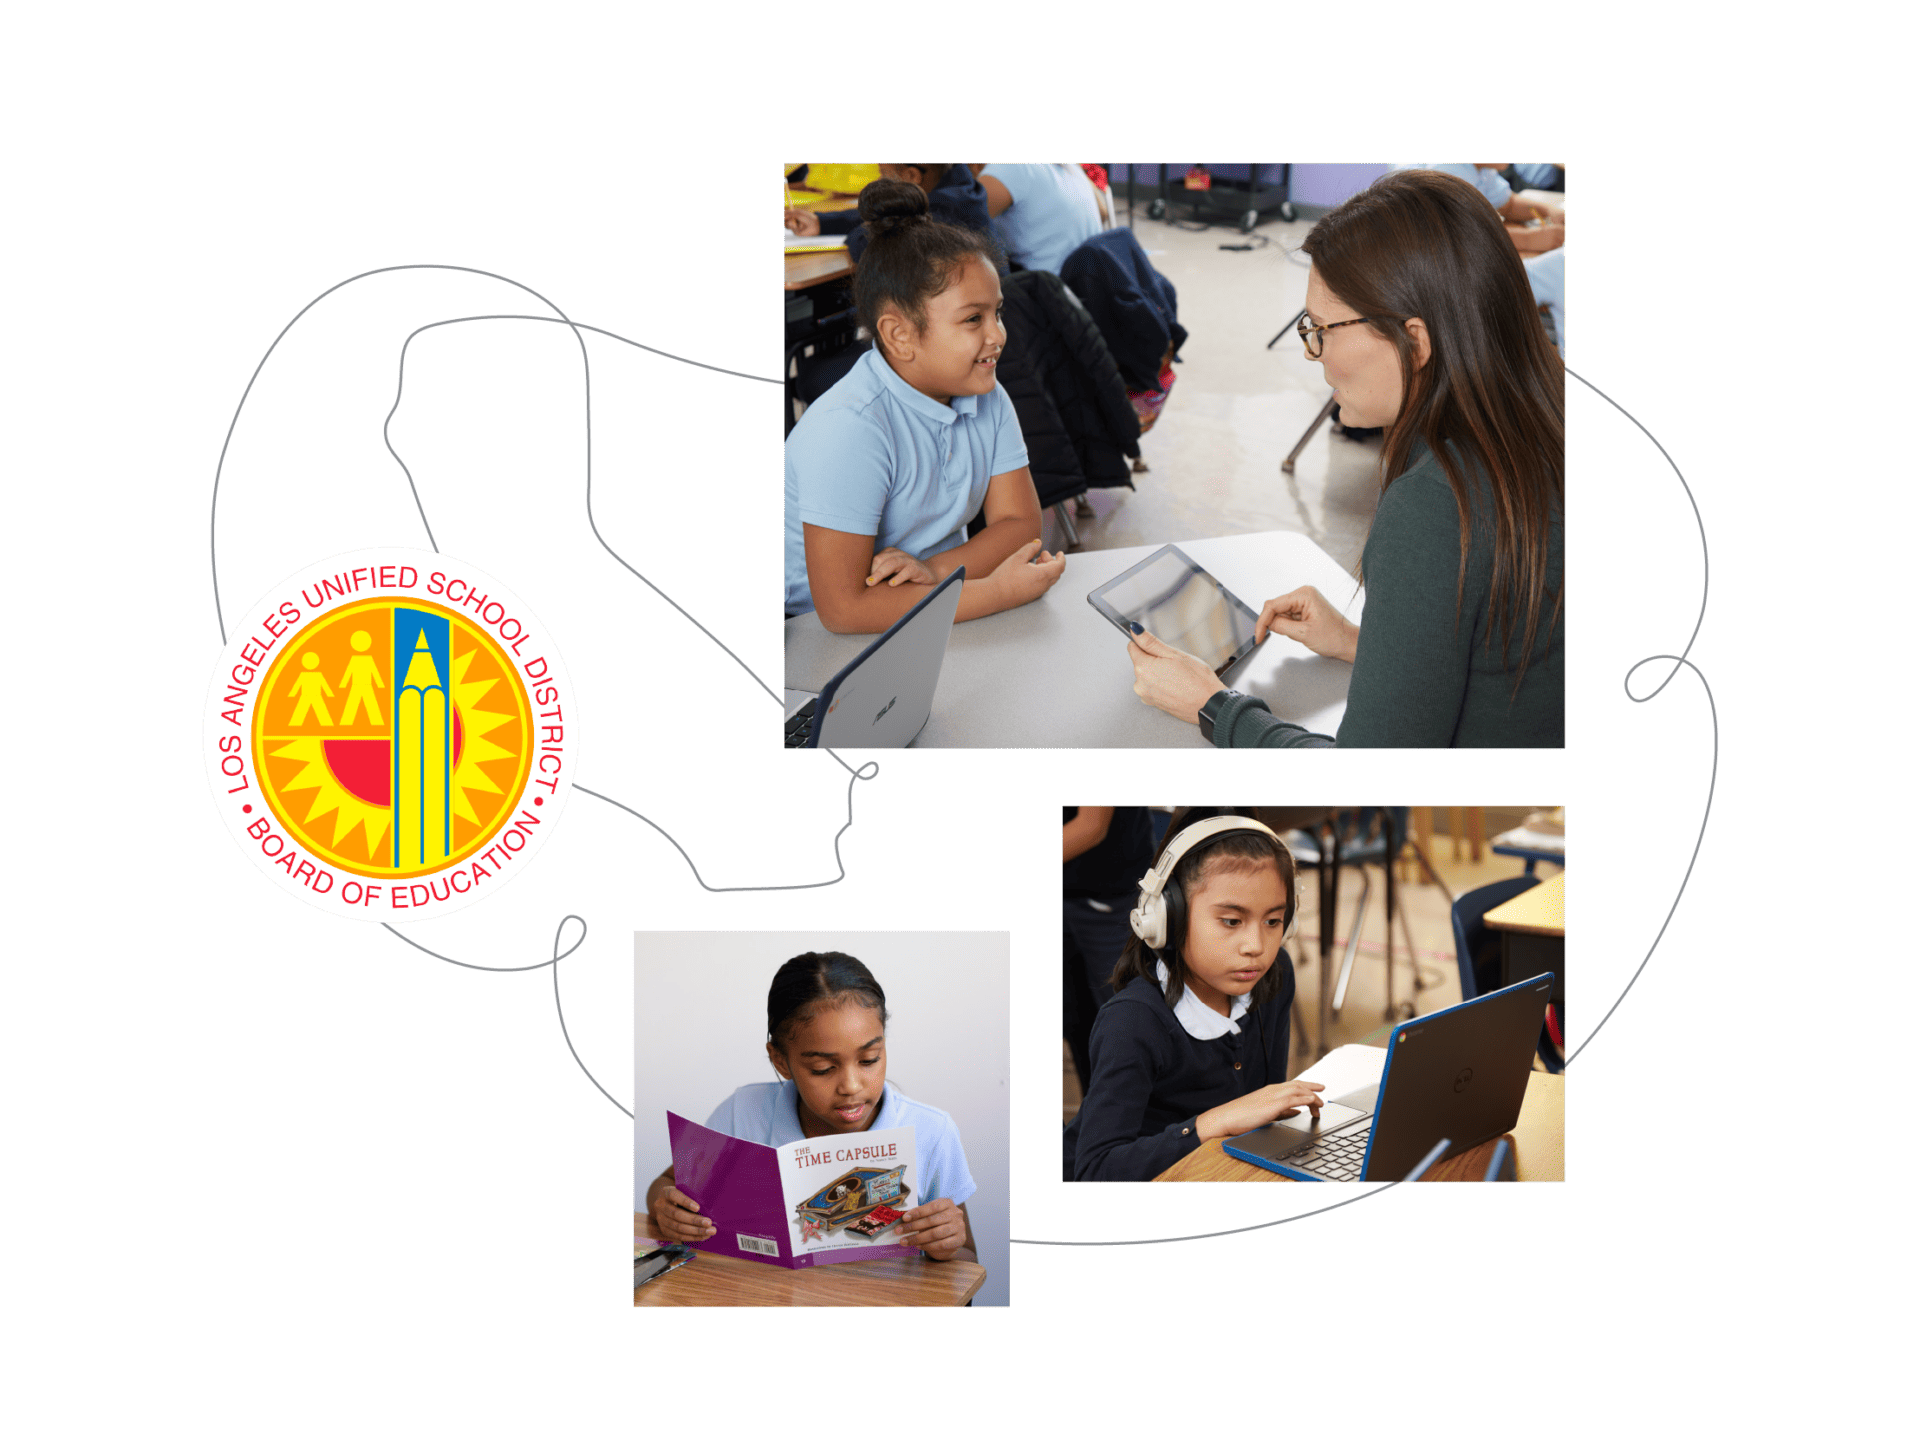 3 images of students learning, along with the LAUSD logo